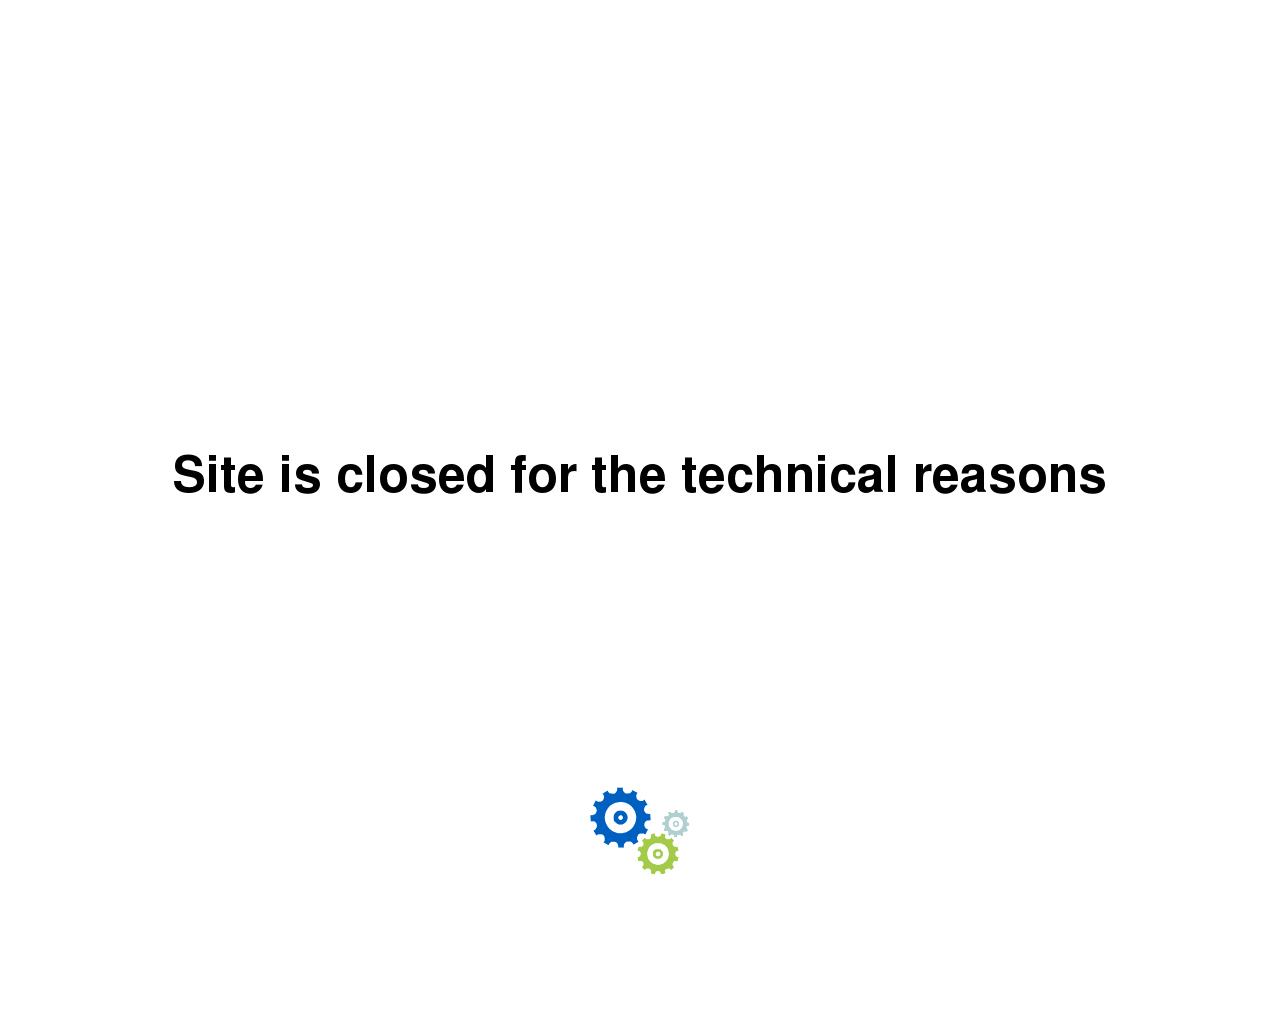 Queue is currently closed перевод. Temporarily closed for Technical reasons иконка. Now not working website for technique reasons.